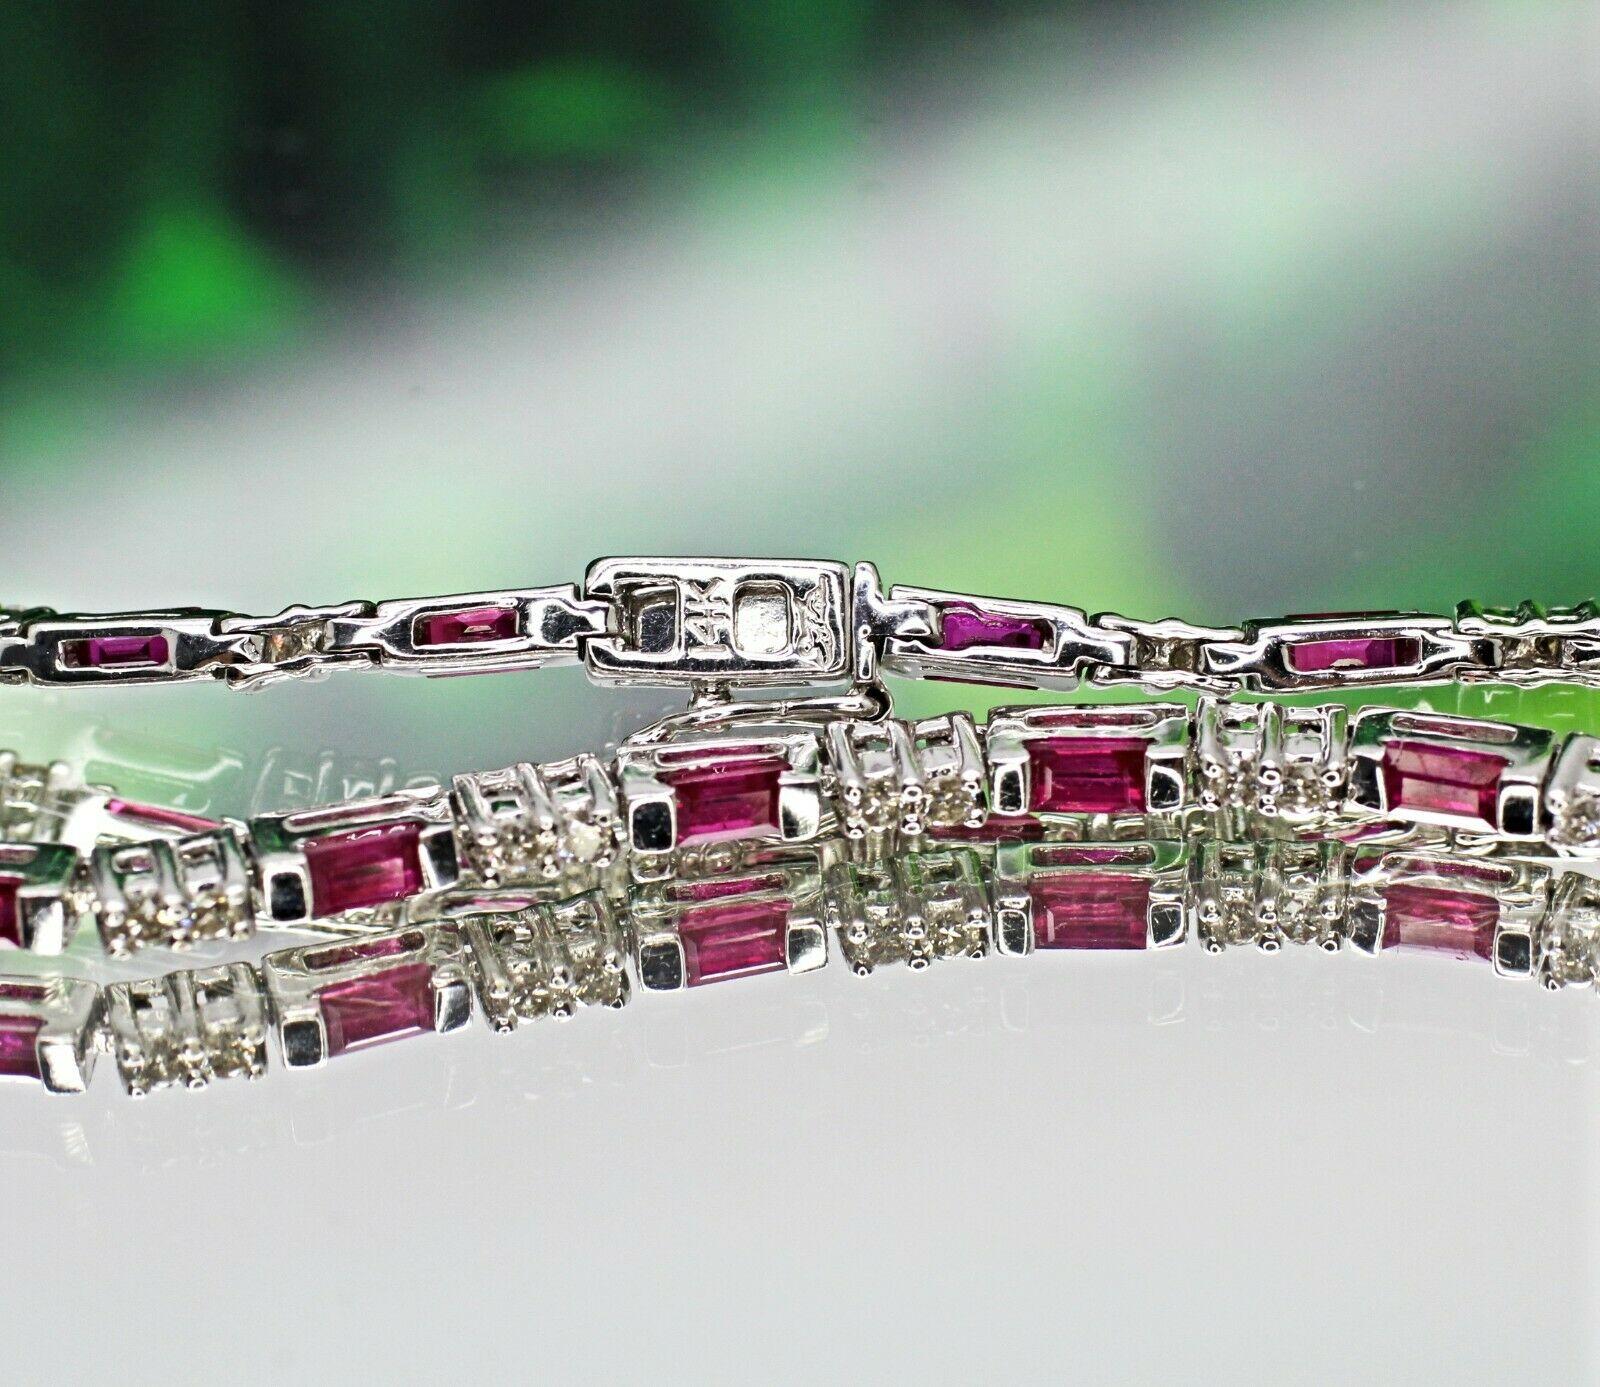  Beautiful 14K white gold custom made bracelet with 17 pieces emerald cut  ruby in 0.10 carat each stone and 35 pieces of round cut diamonds in approximately 0.50 carat total weight. 
Specifications:
    main stone: RUBY APPROX. 0.10 CT EACH 17PCS.
